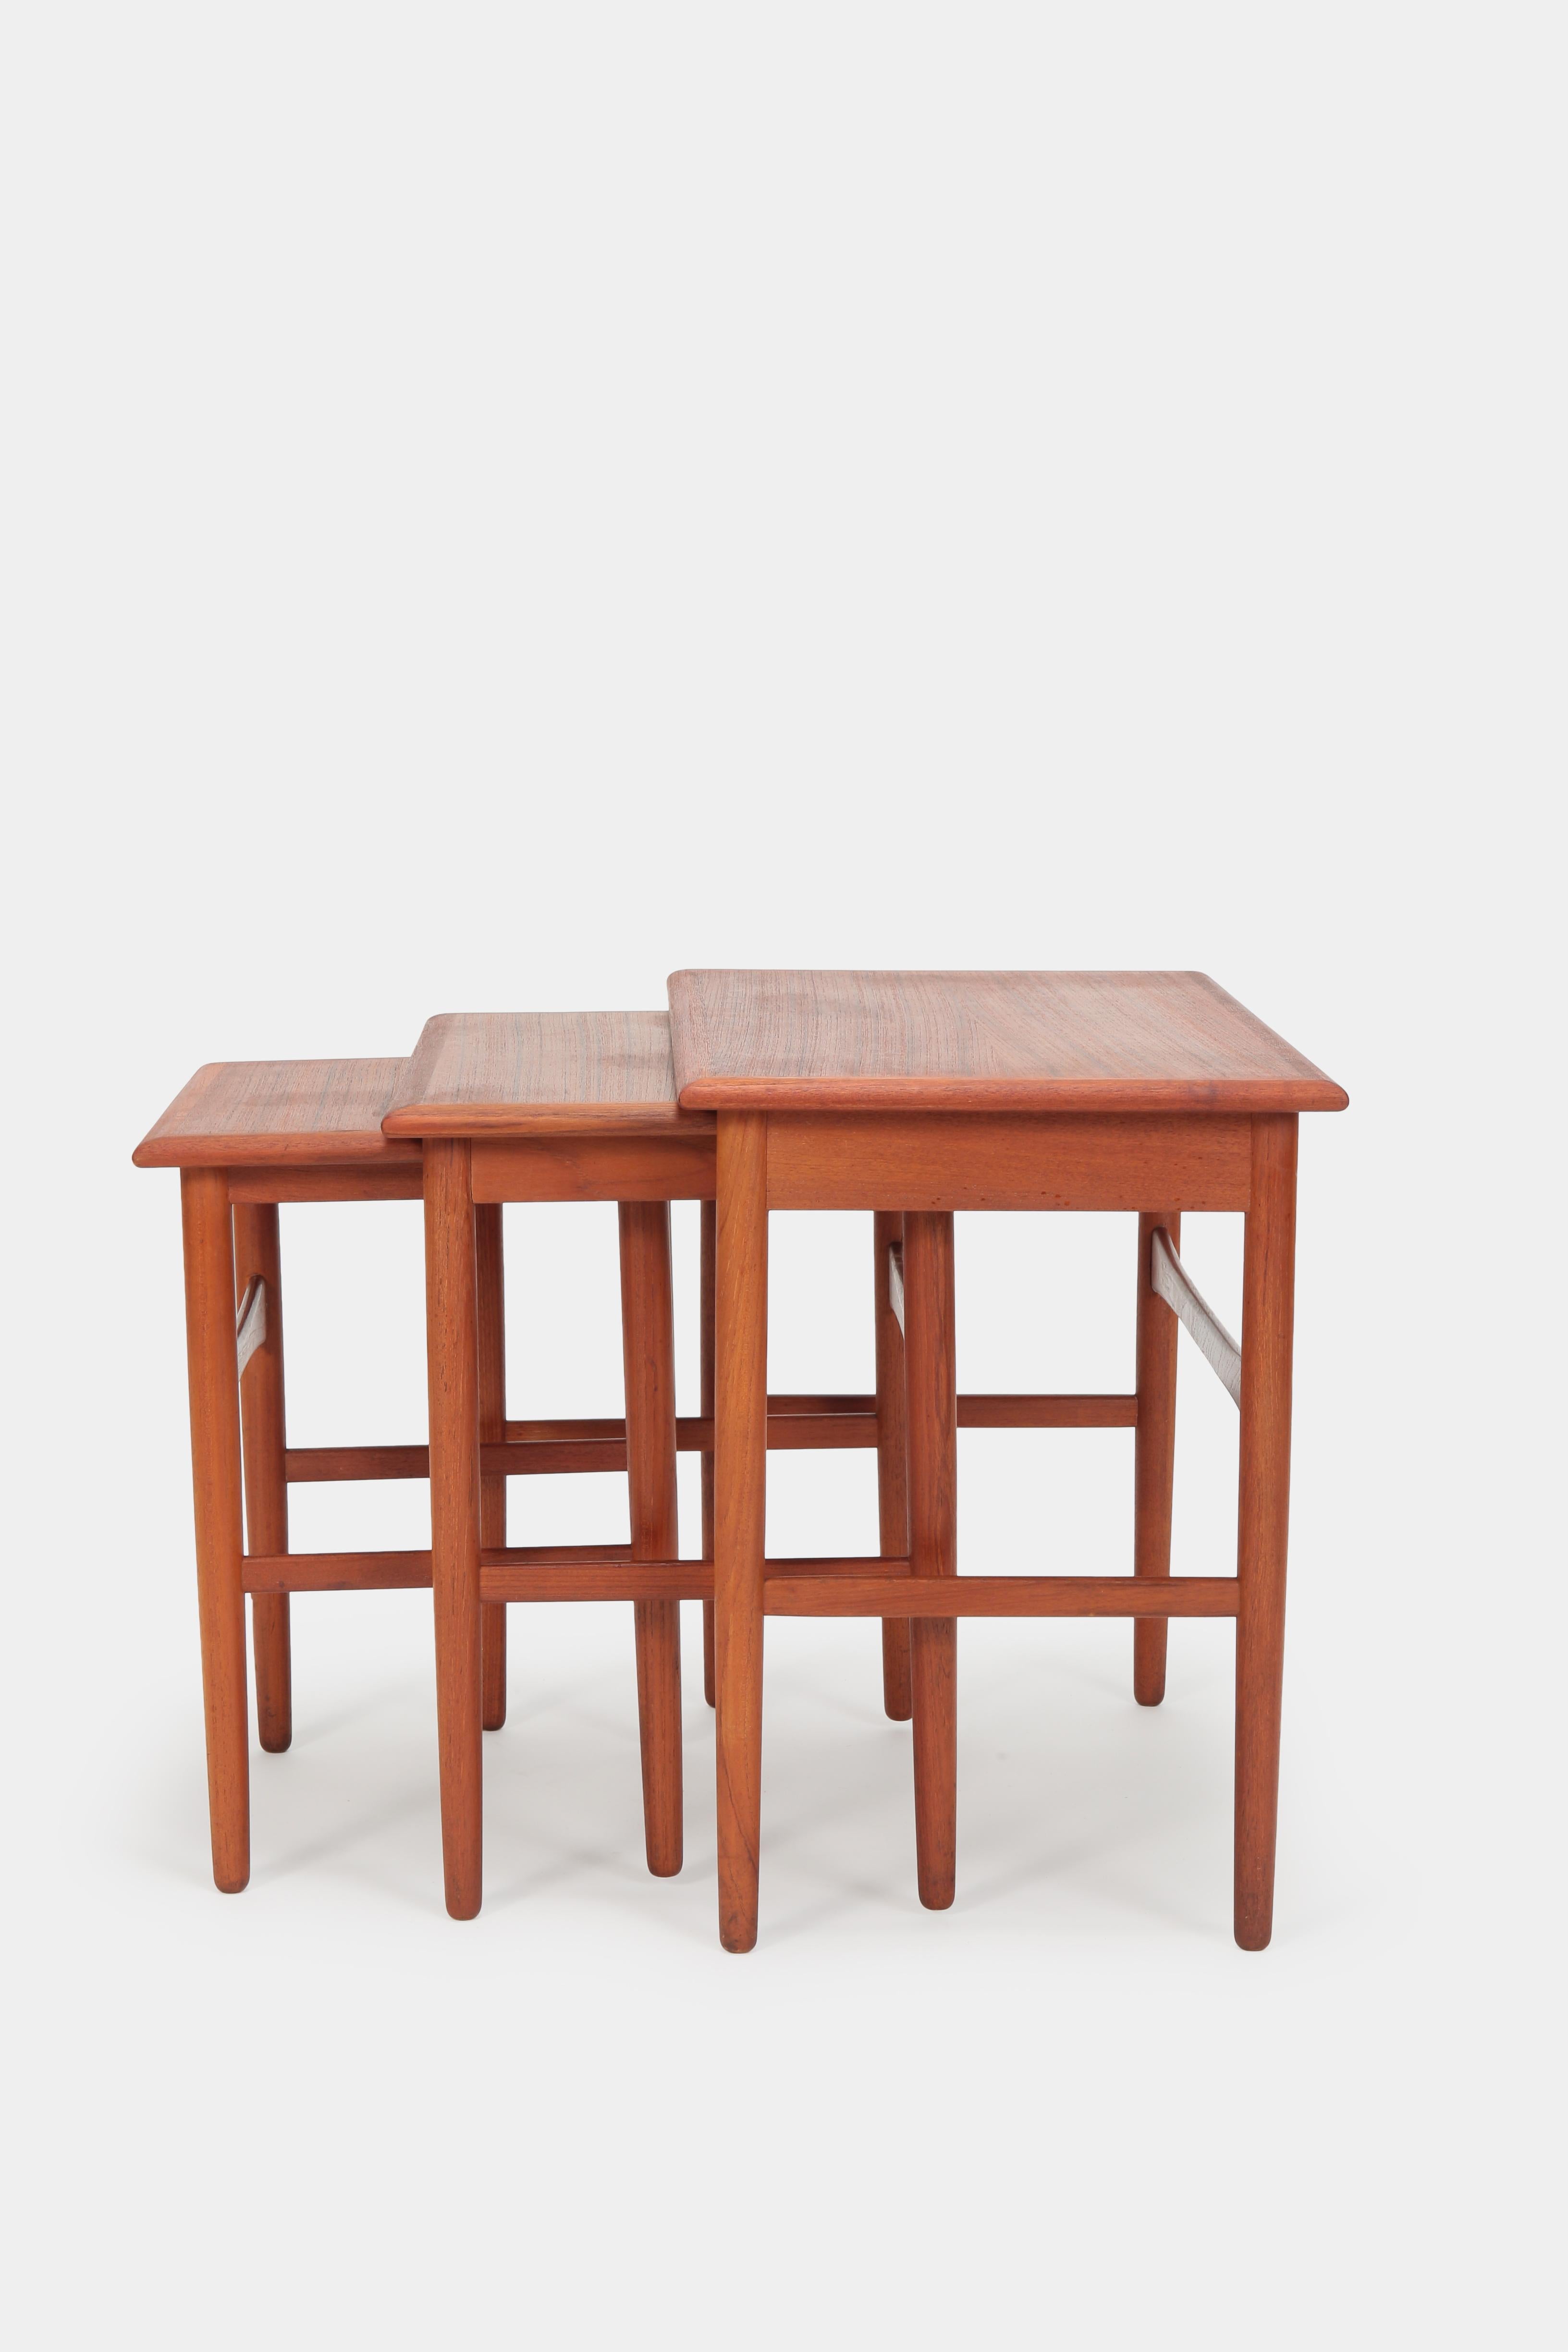 Kai Kristiansen nesting tables by MH Møbler in the 1960s in Denmark, Svendborg. Three nesting tables made of solid teak wood in very good condition.